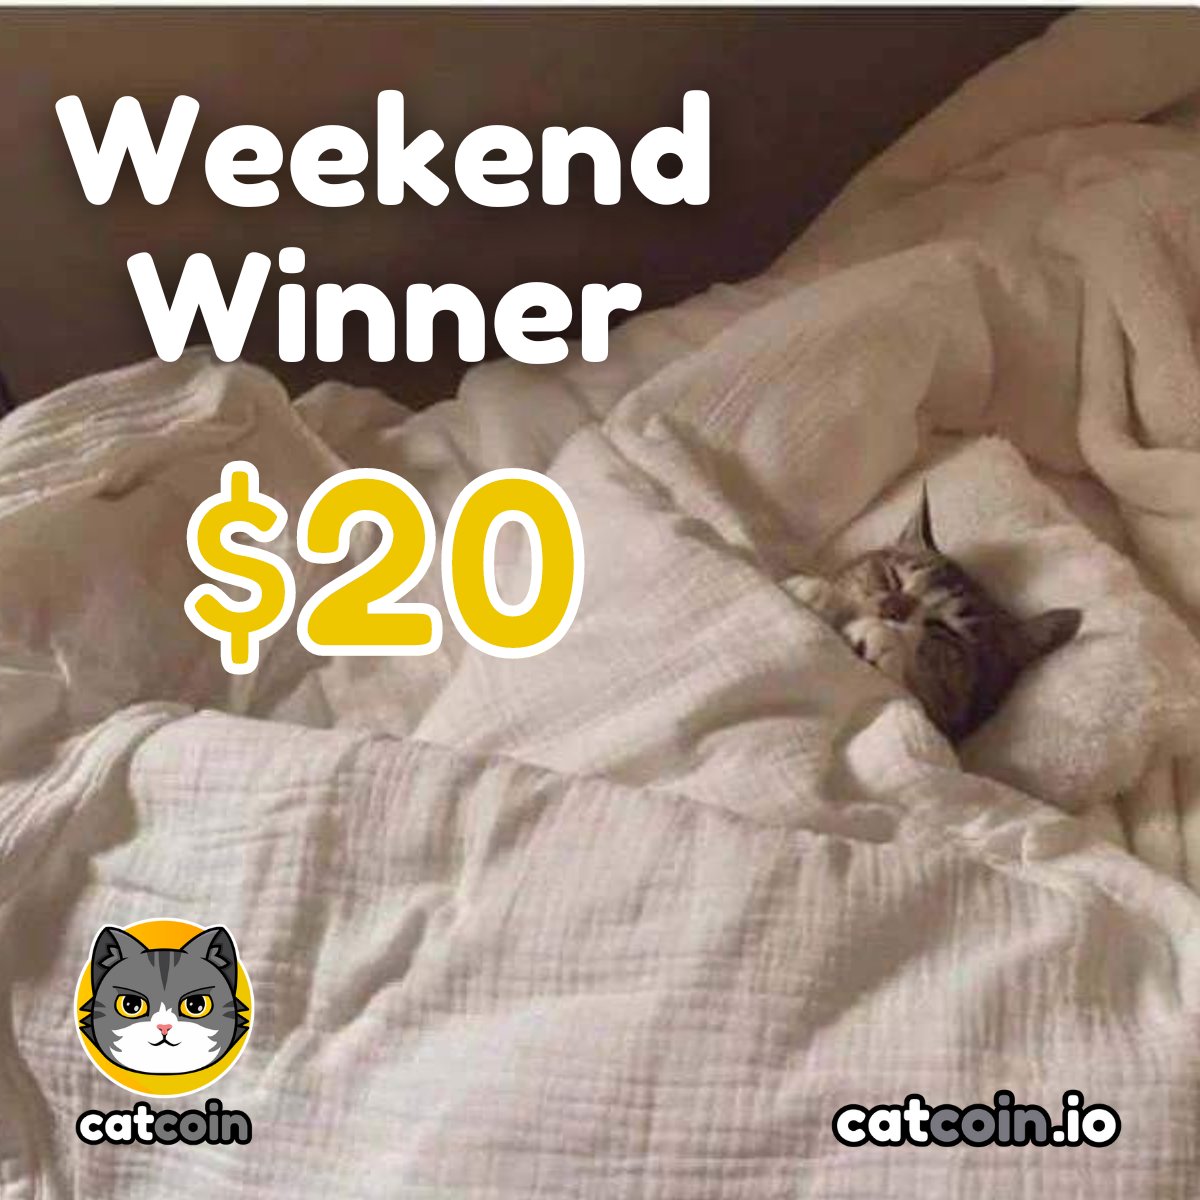 Weekend Winner - $20

• Follow @officialcatcoin
• Retweet 
• And comment #Catcoin #USDT #giveaway 

48 hours